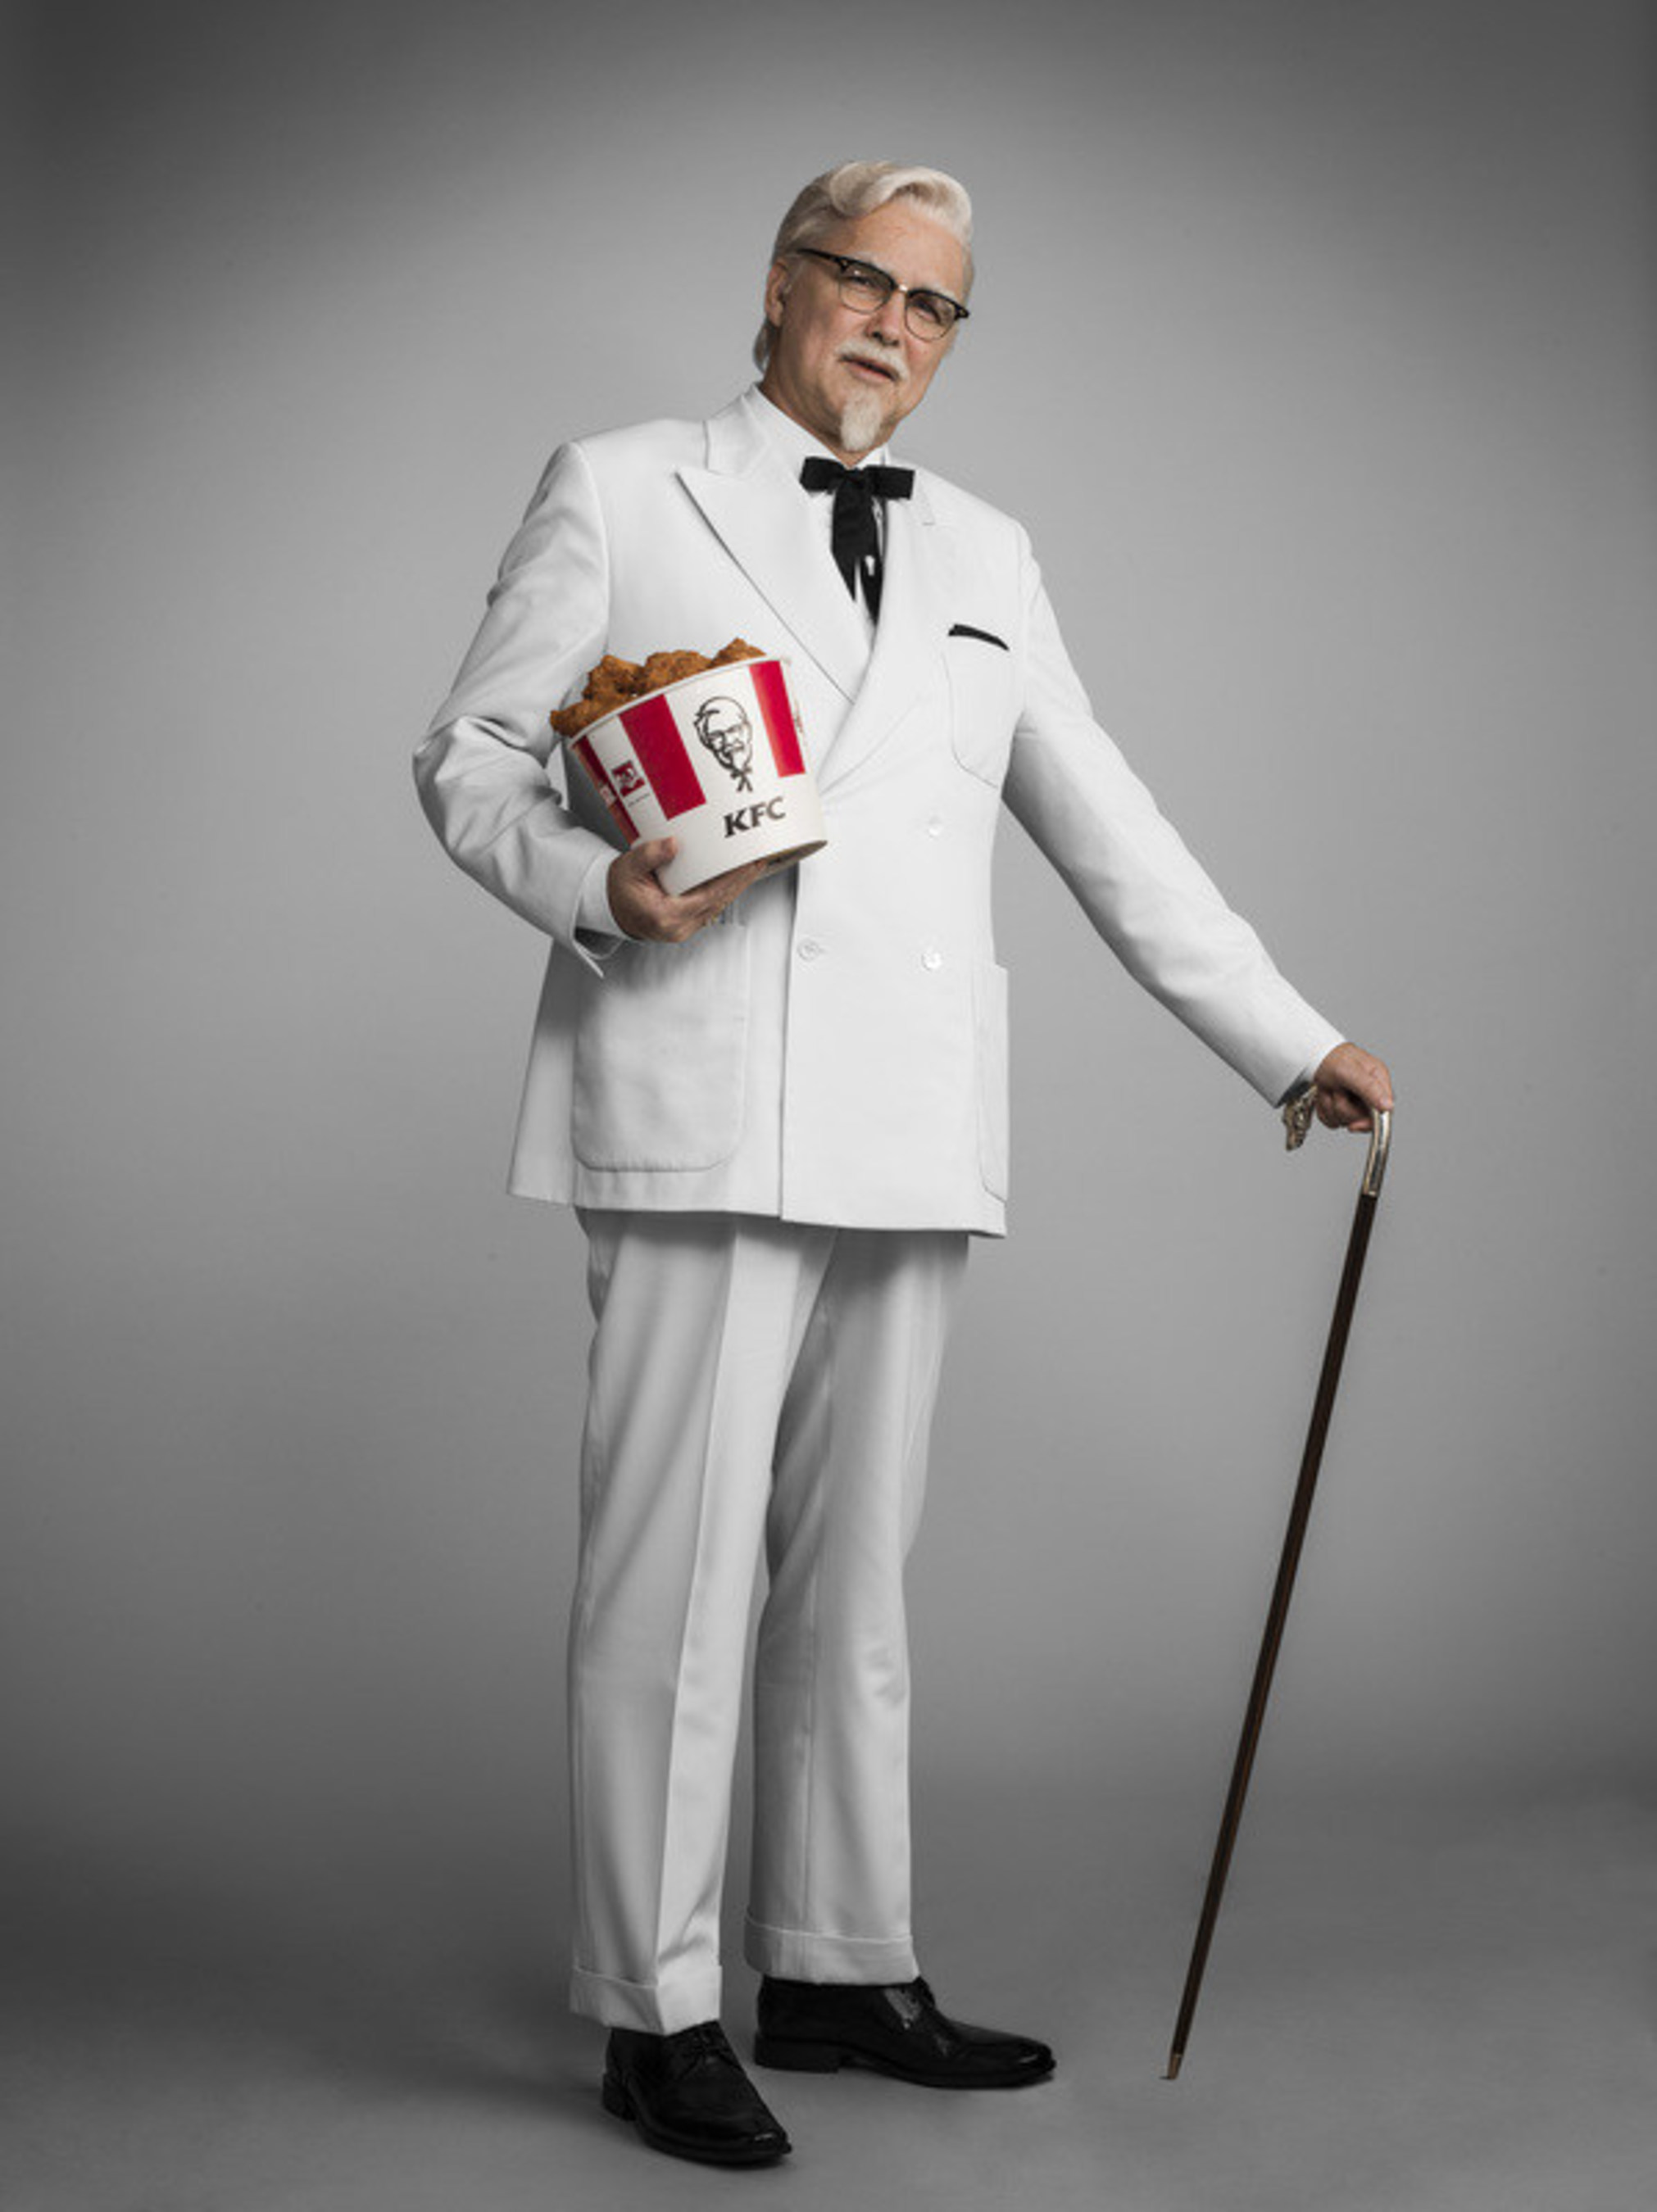 Norm Macdonald "Assumes The Suit" As The Real Colonel Sanders To